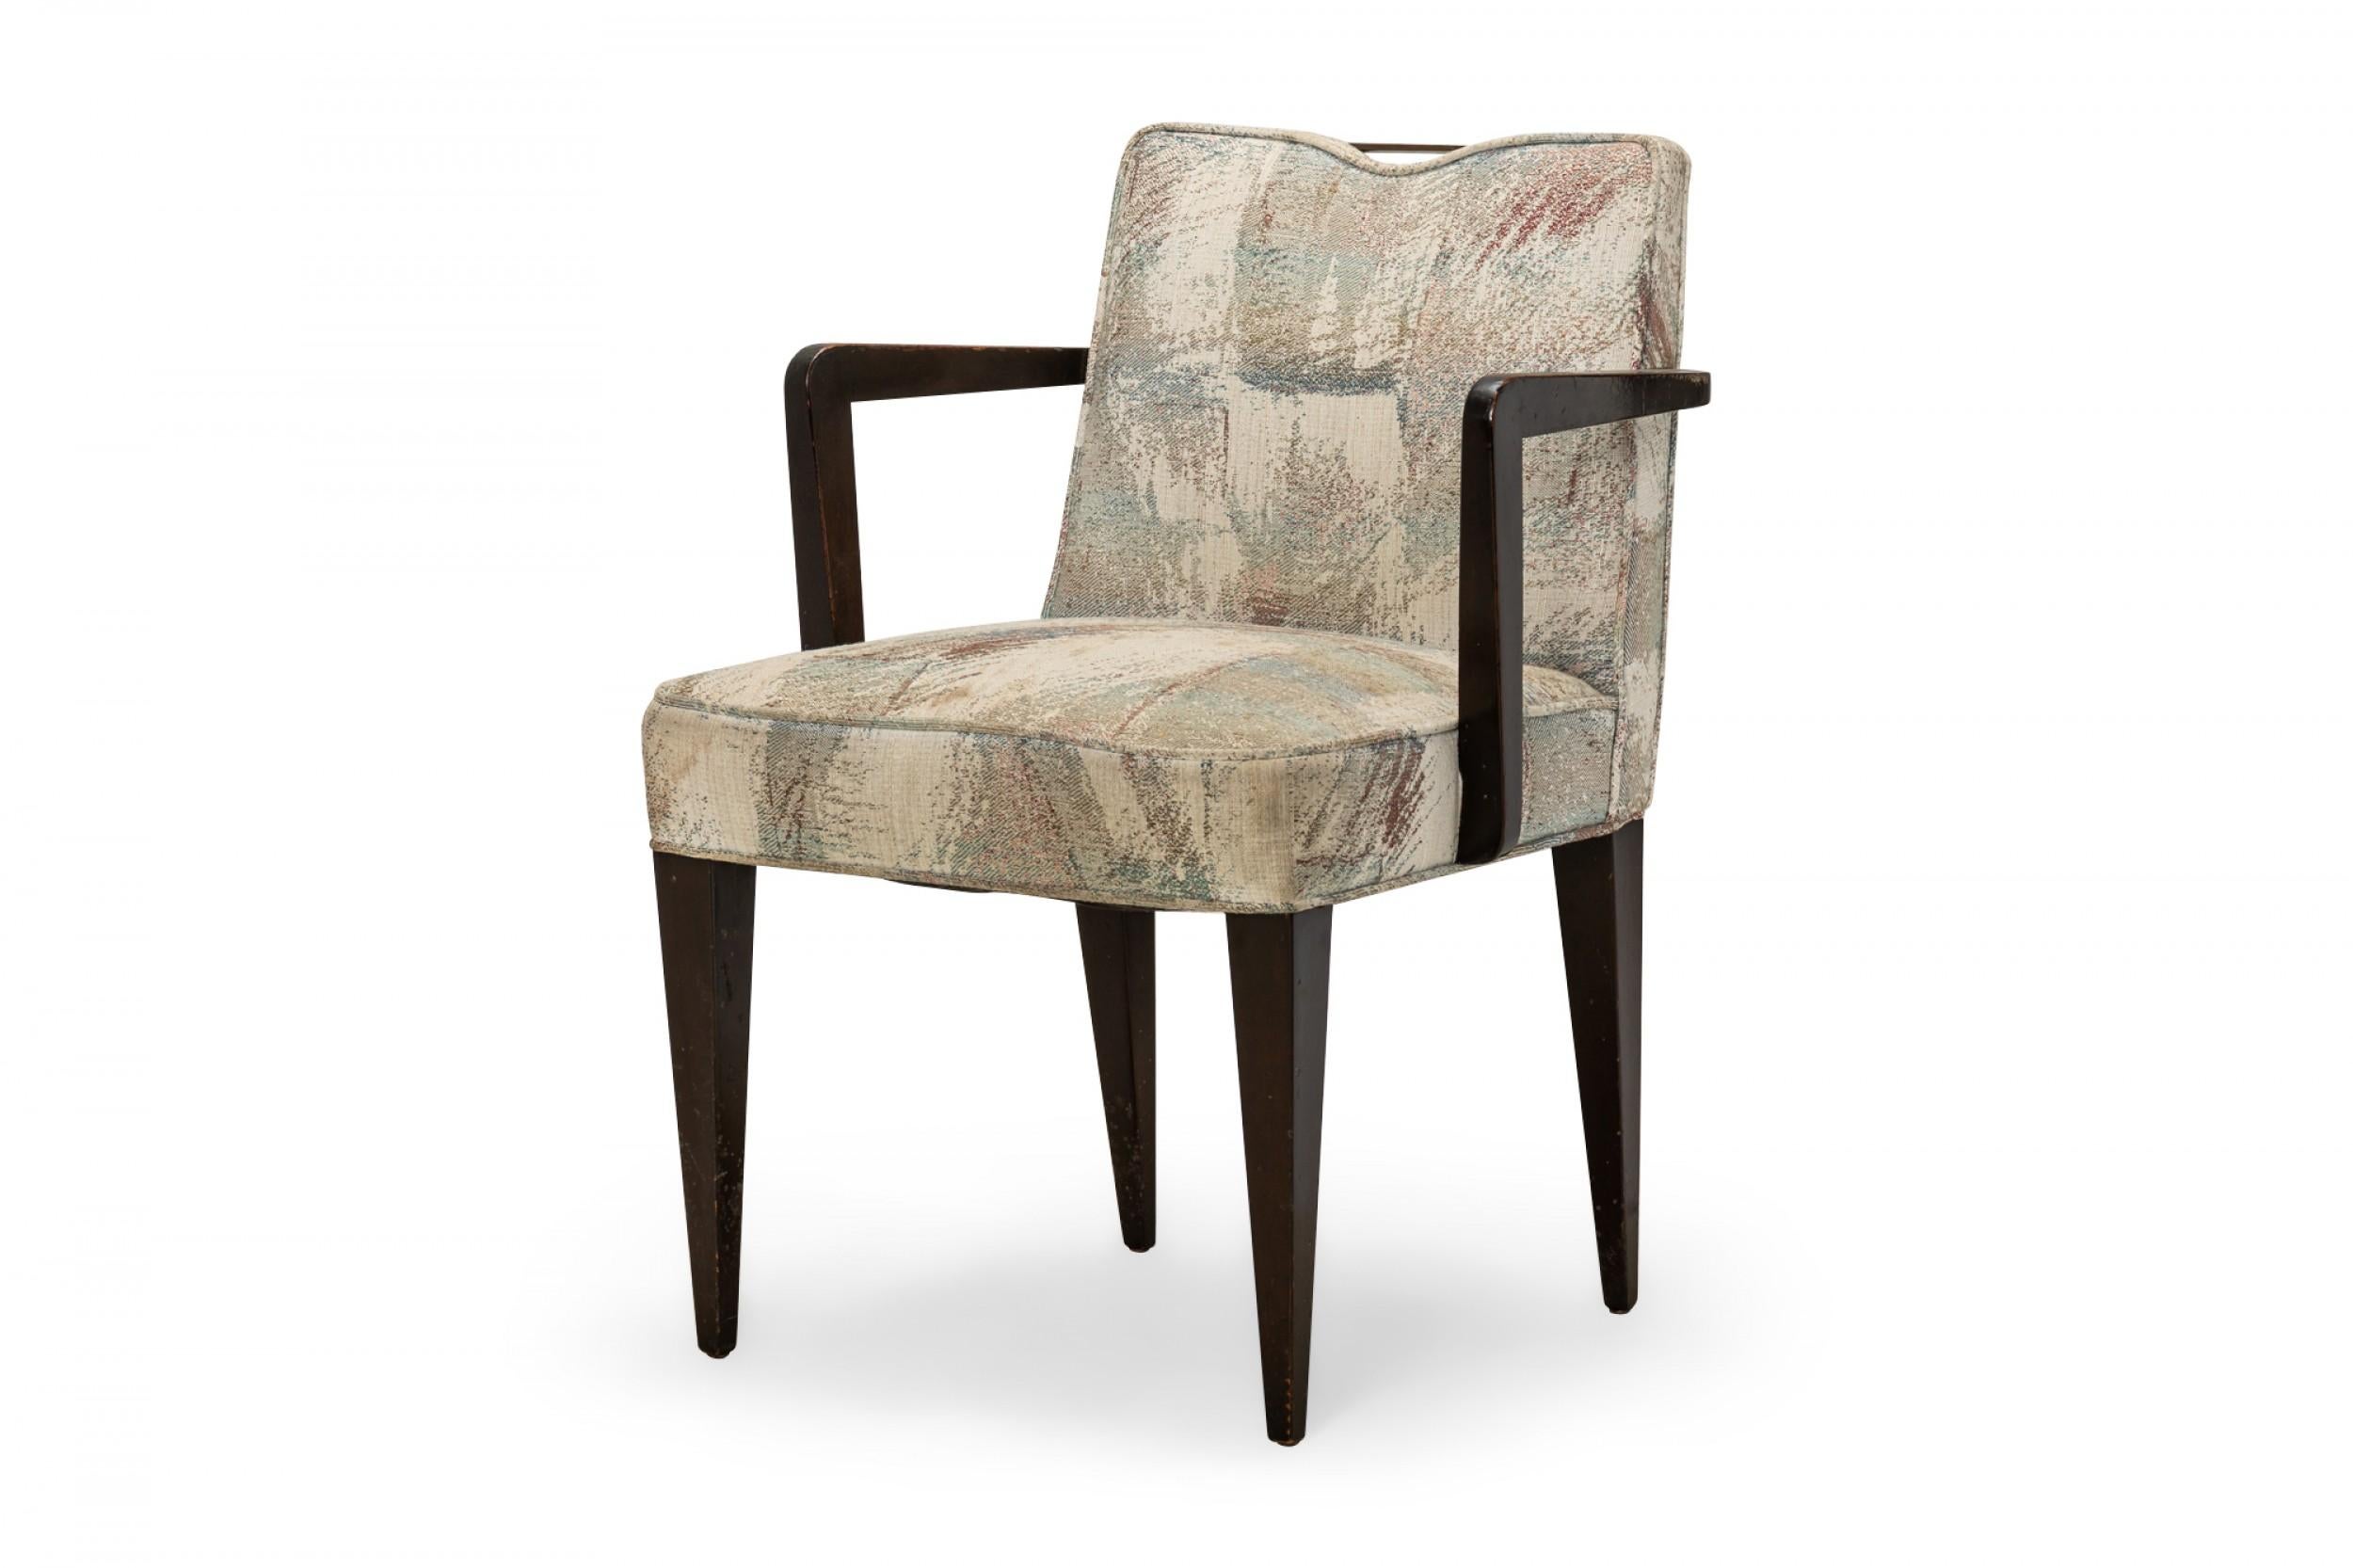 patterned upholstered dining chairs